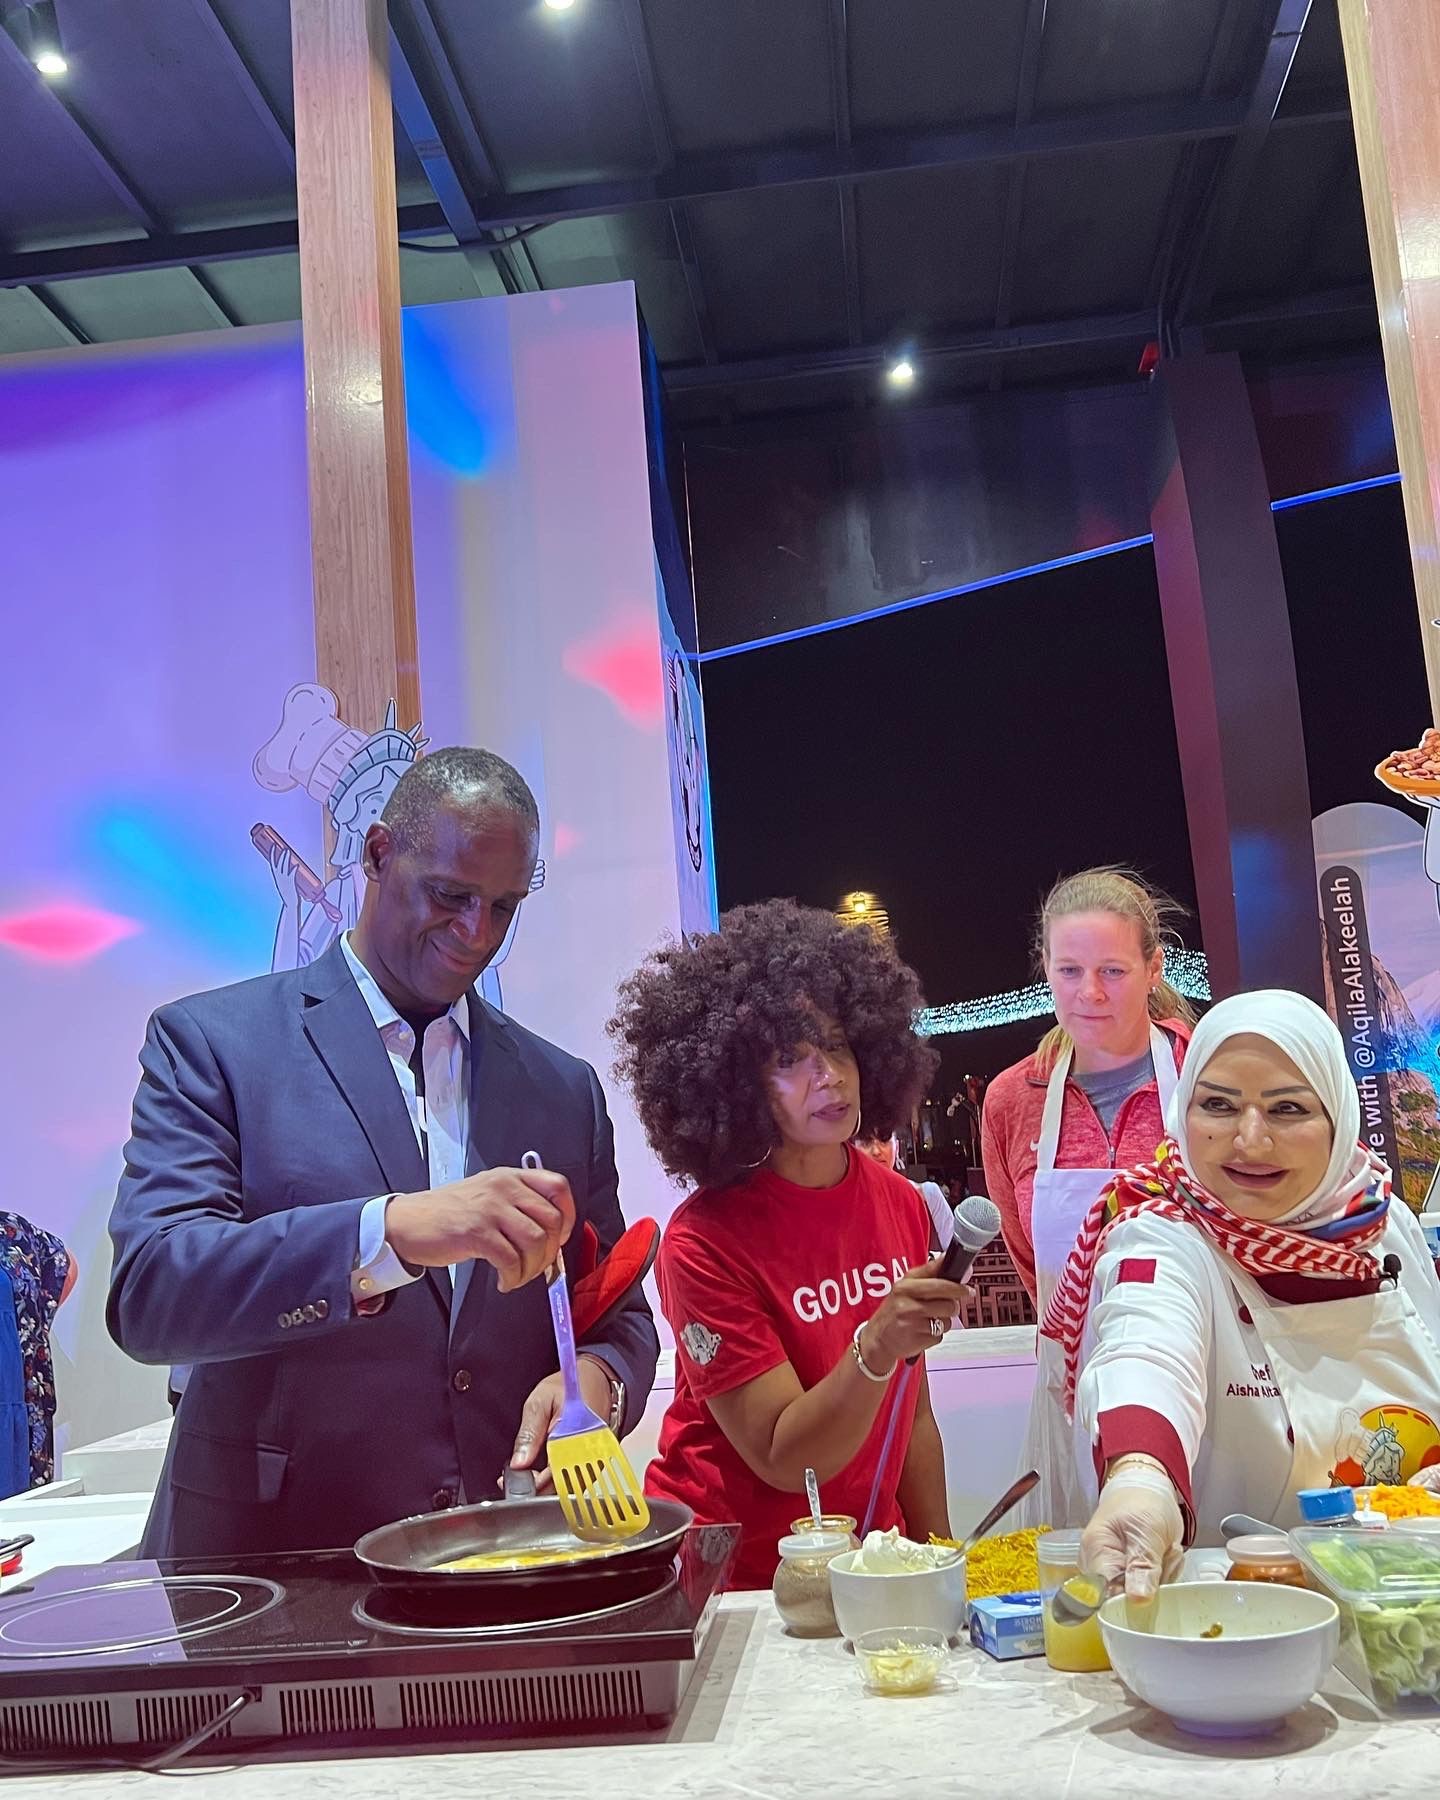 (Pictured left to right) U.S. Ambassador to Qatar Timmy Davis, USDA Agricultural Counselor Valerie Brown, and U.S. Soccer President Cindy Parlow Cone join Qatari Celebrity Chef Aisha Al Tamimi at the USA Pavilion